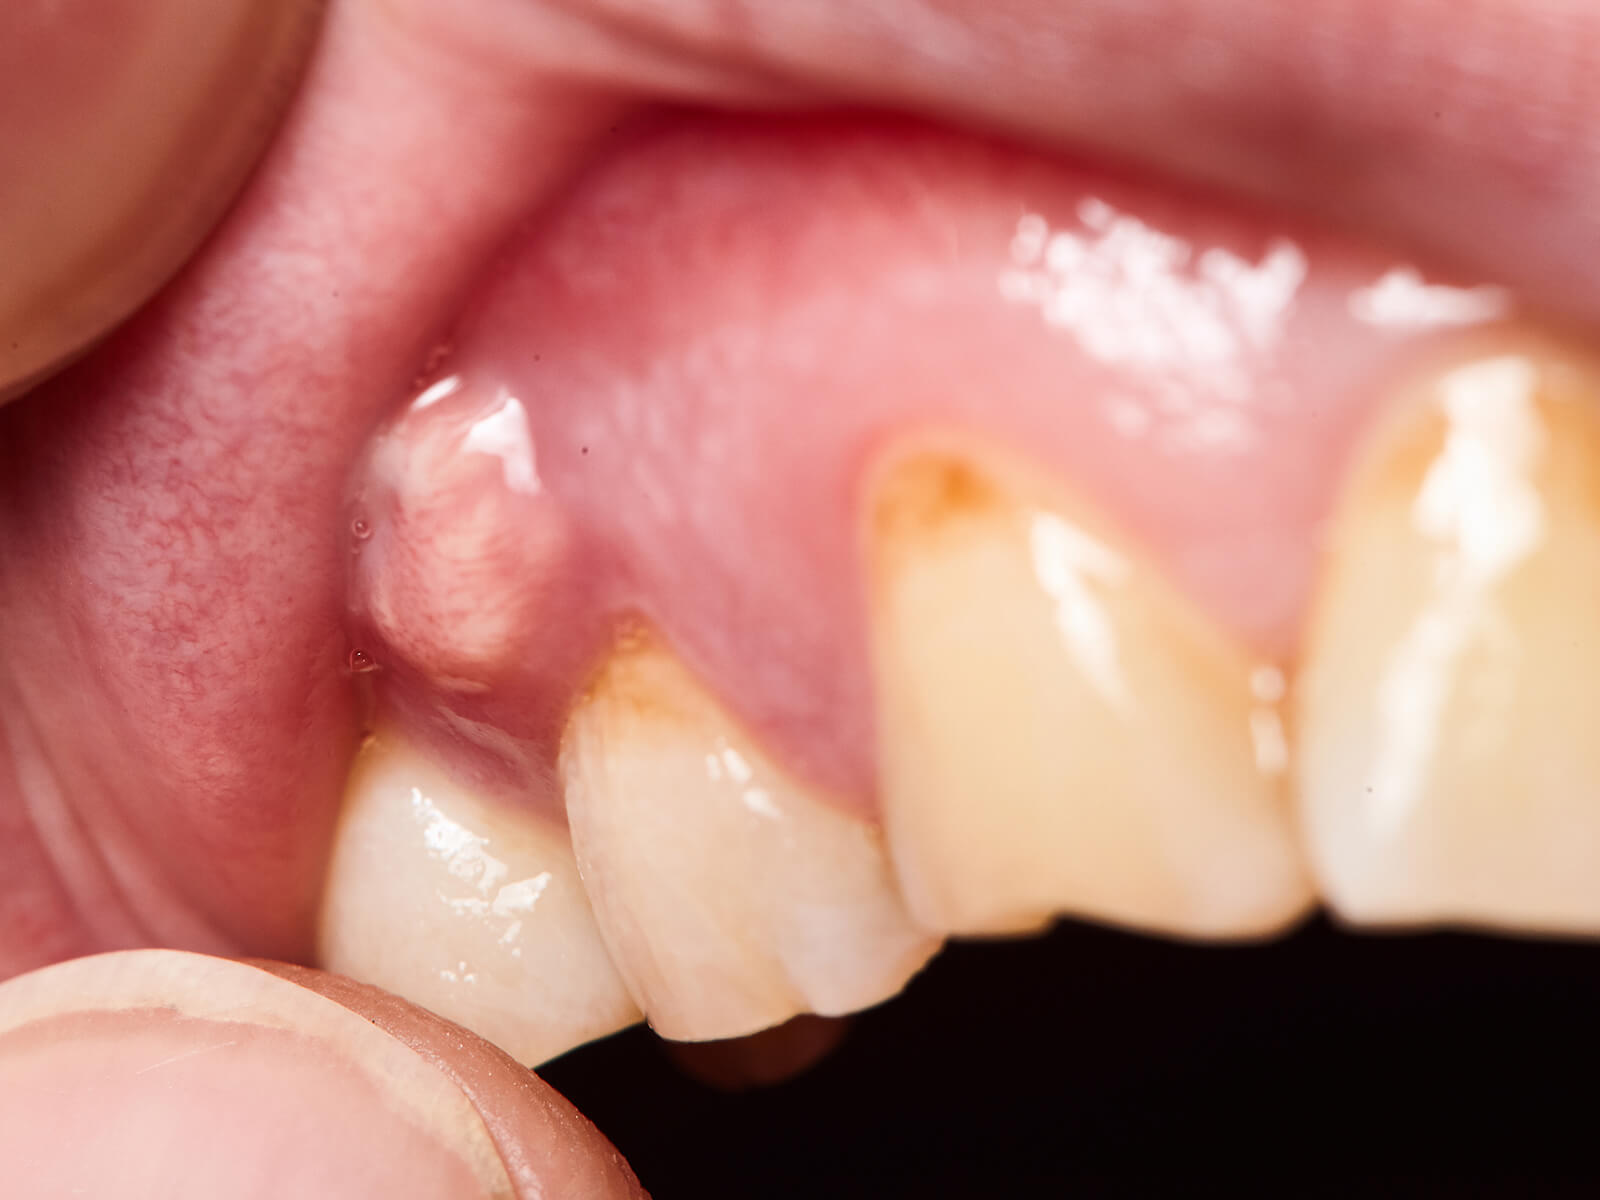 How Does A Tooth Abscess Affect My Oral And Overall Health?